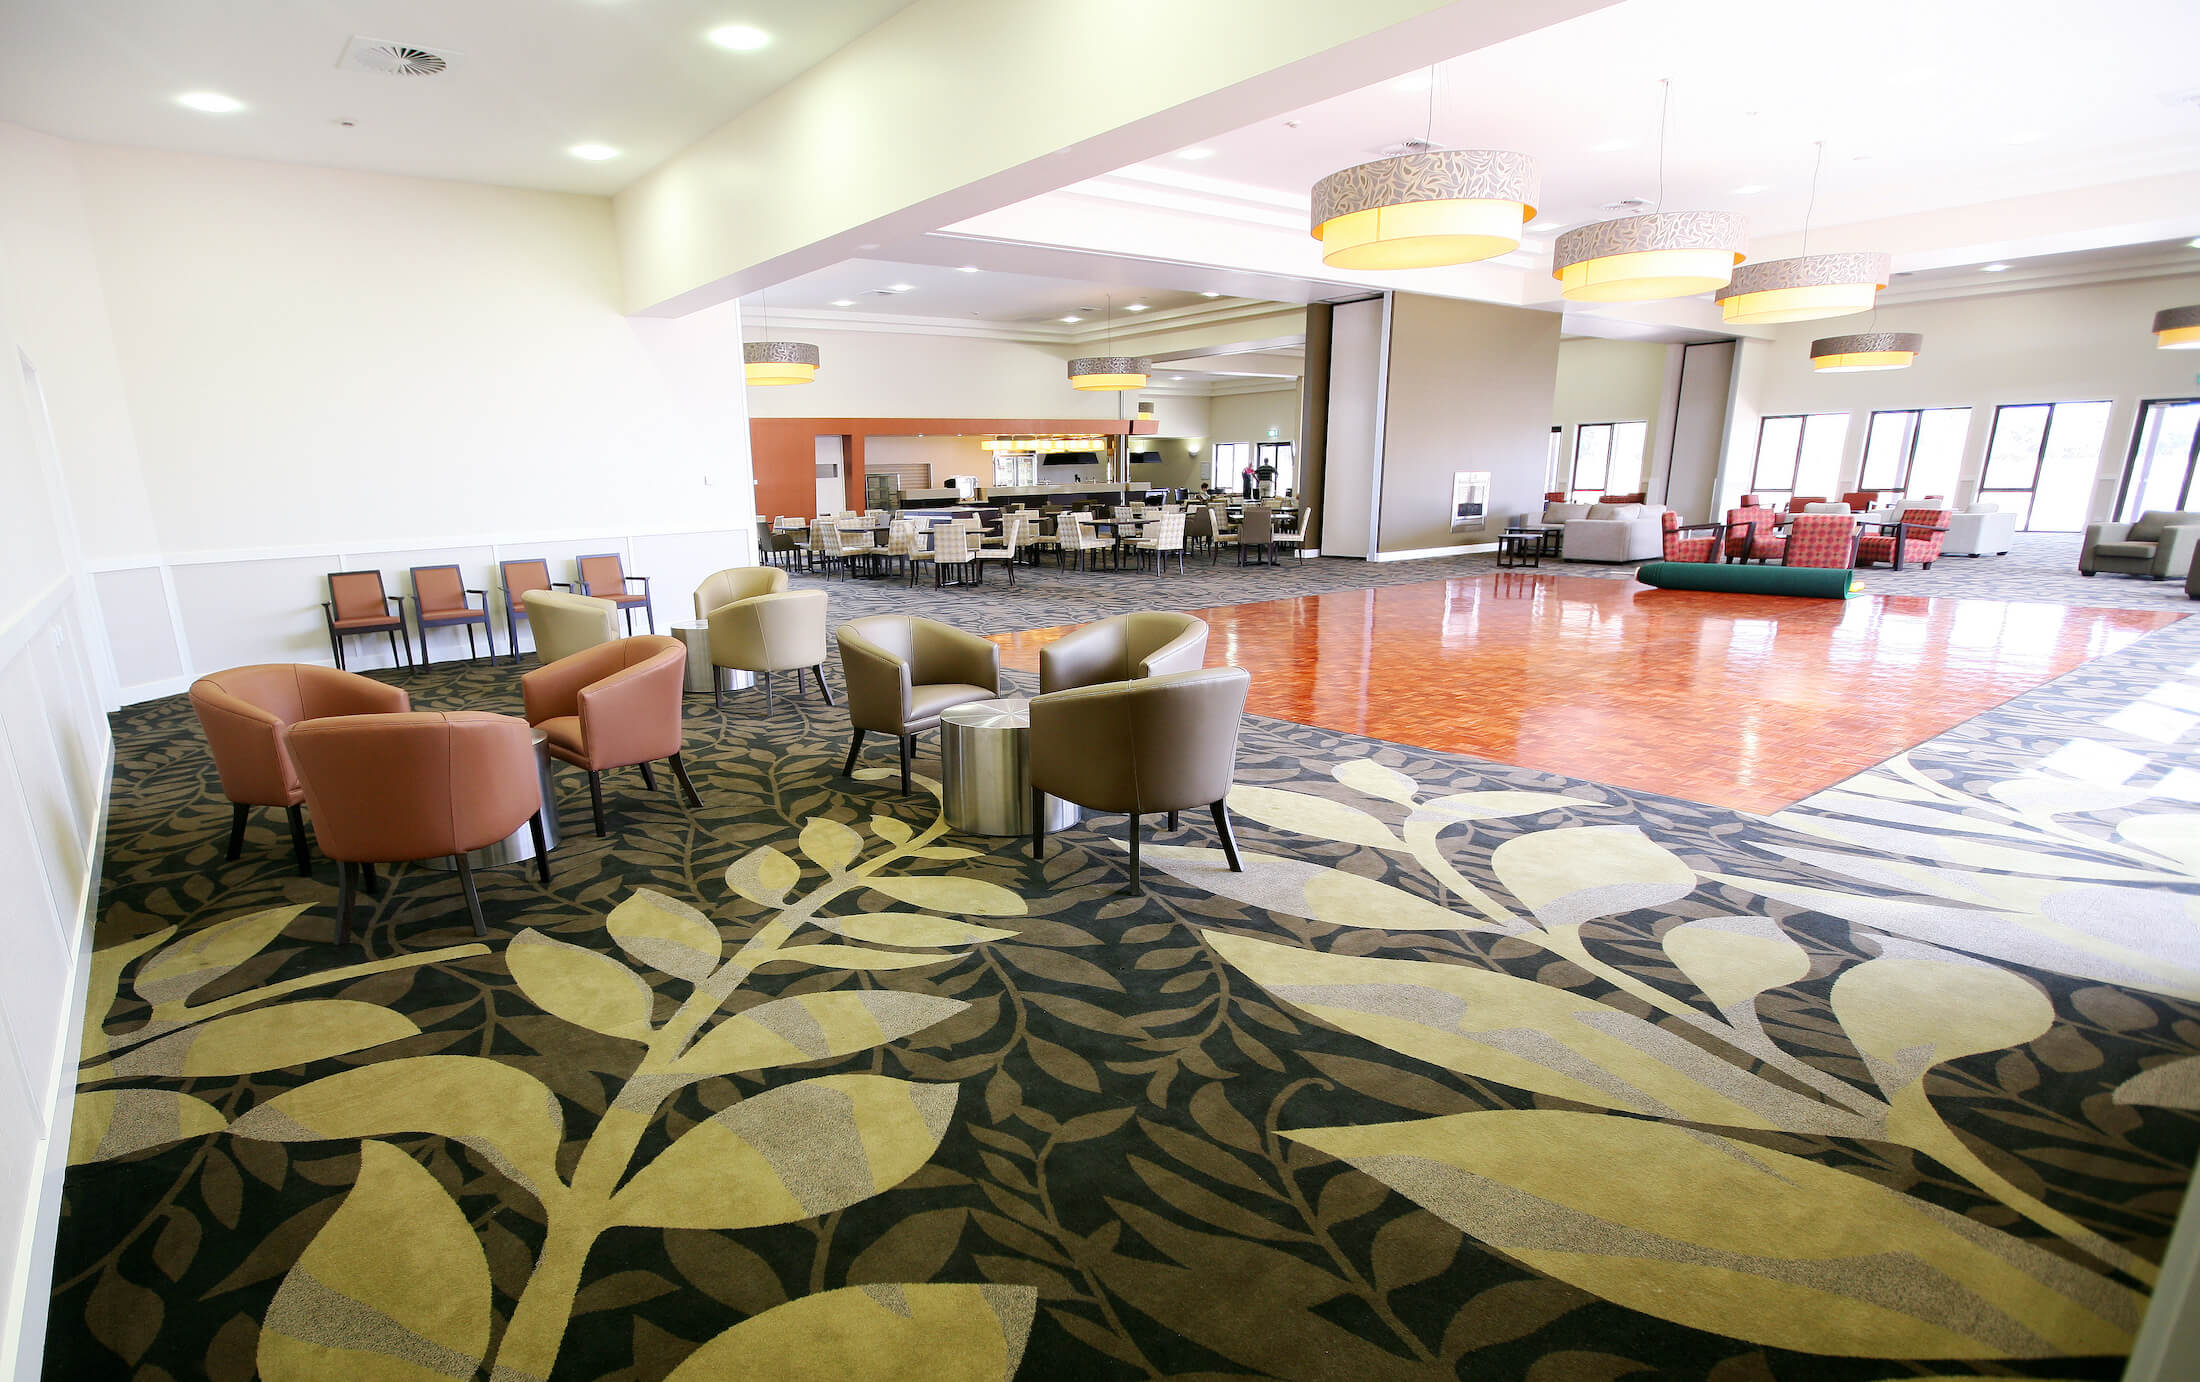 Retirement village carpeted area with lounges and parquet dancefloor, dining beyond